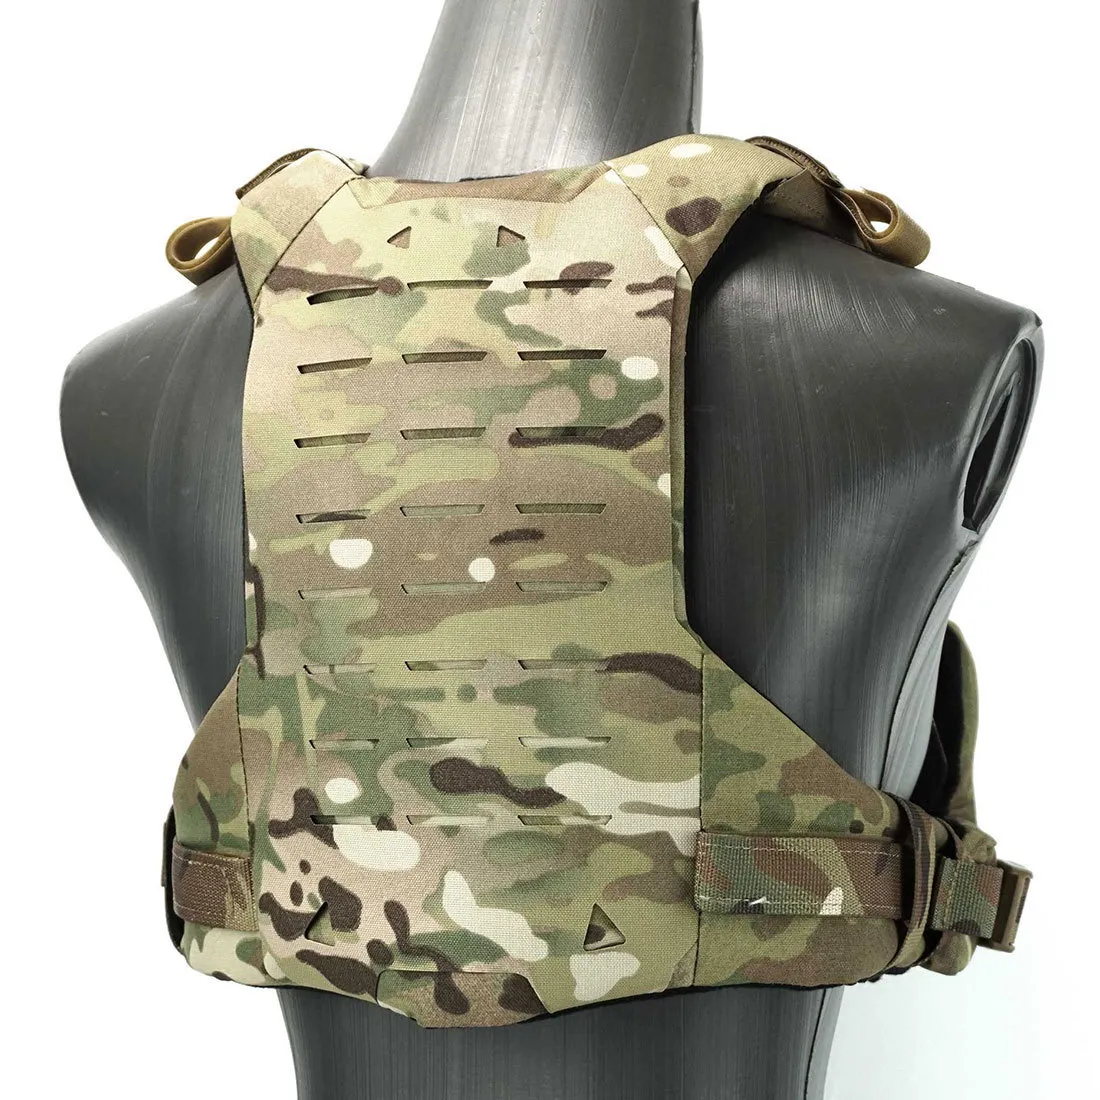 Tactical Bikini Armor Vest Women Protect Cosplay Plate Carrier